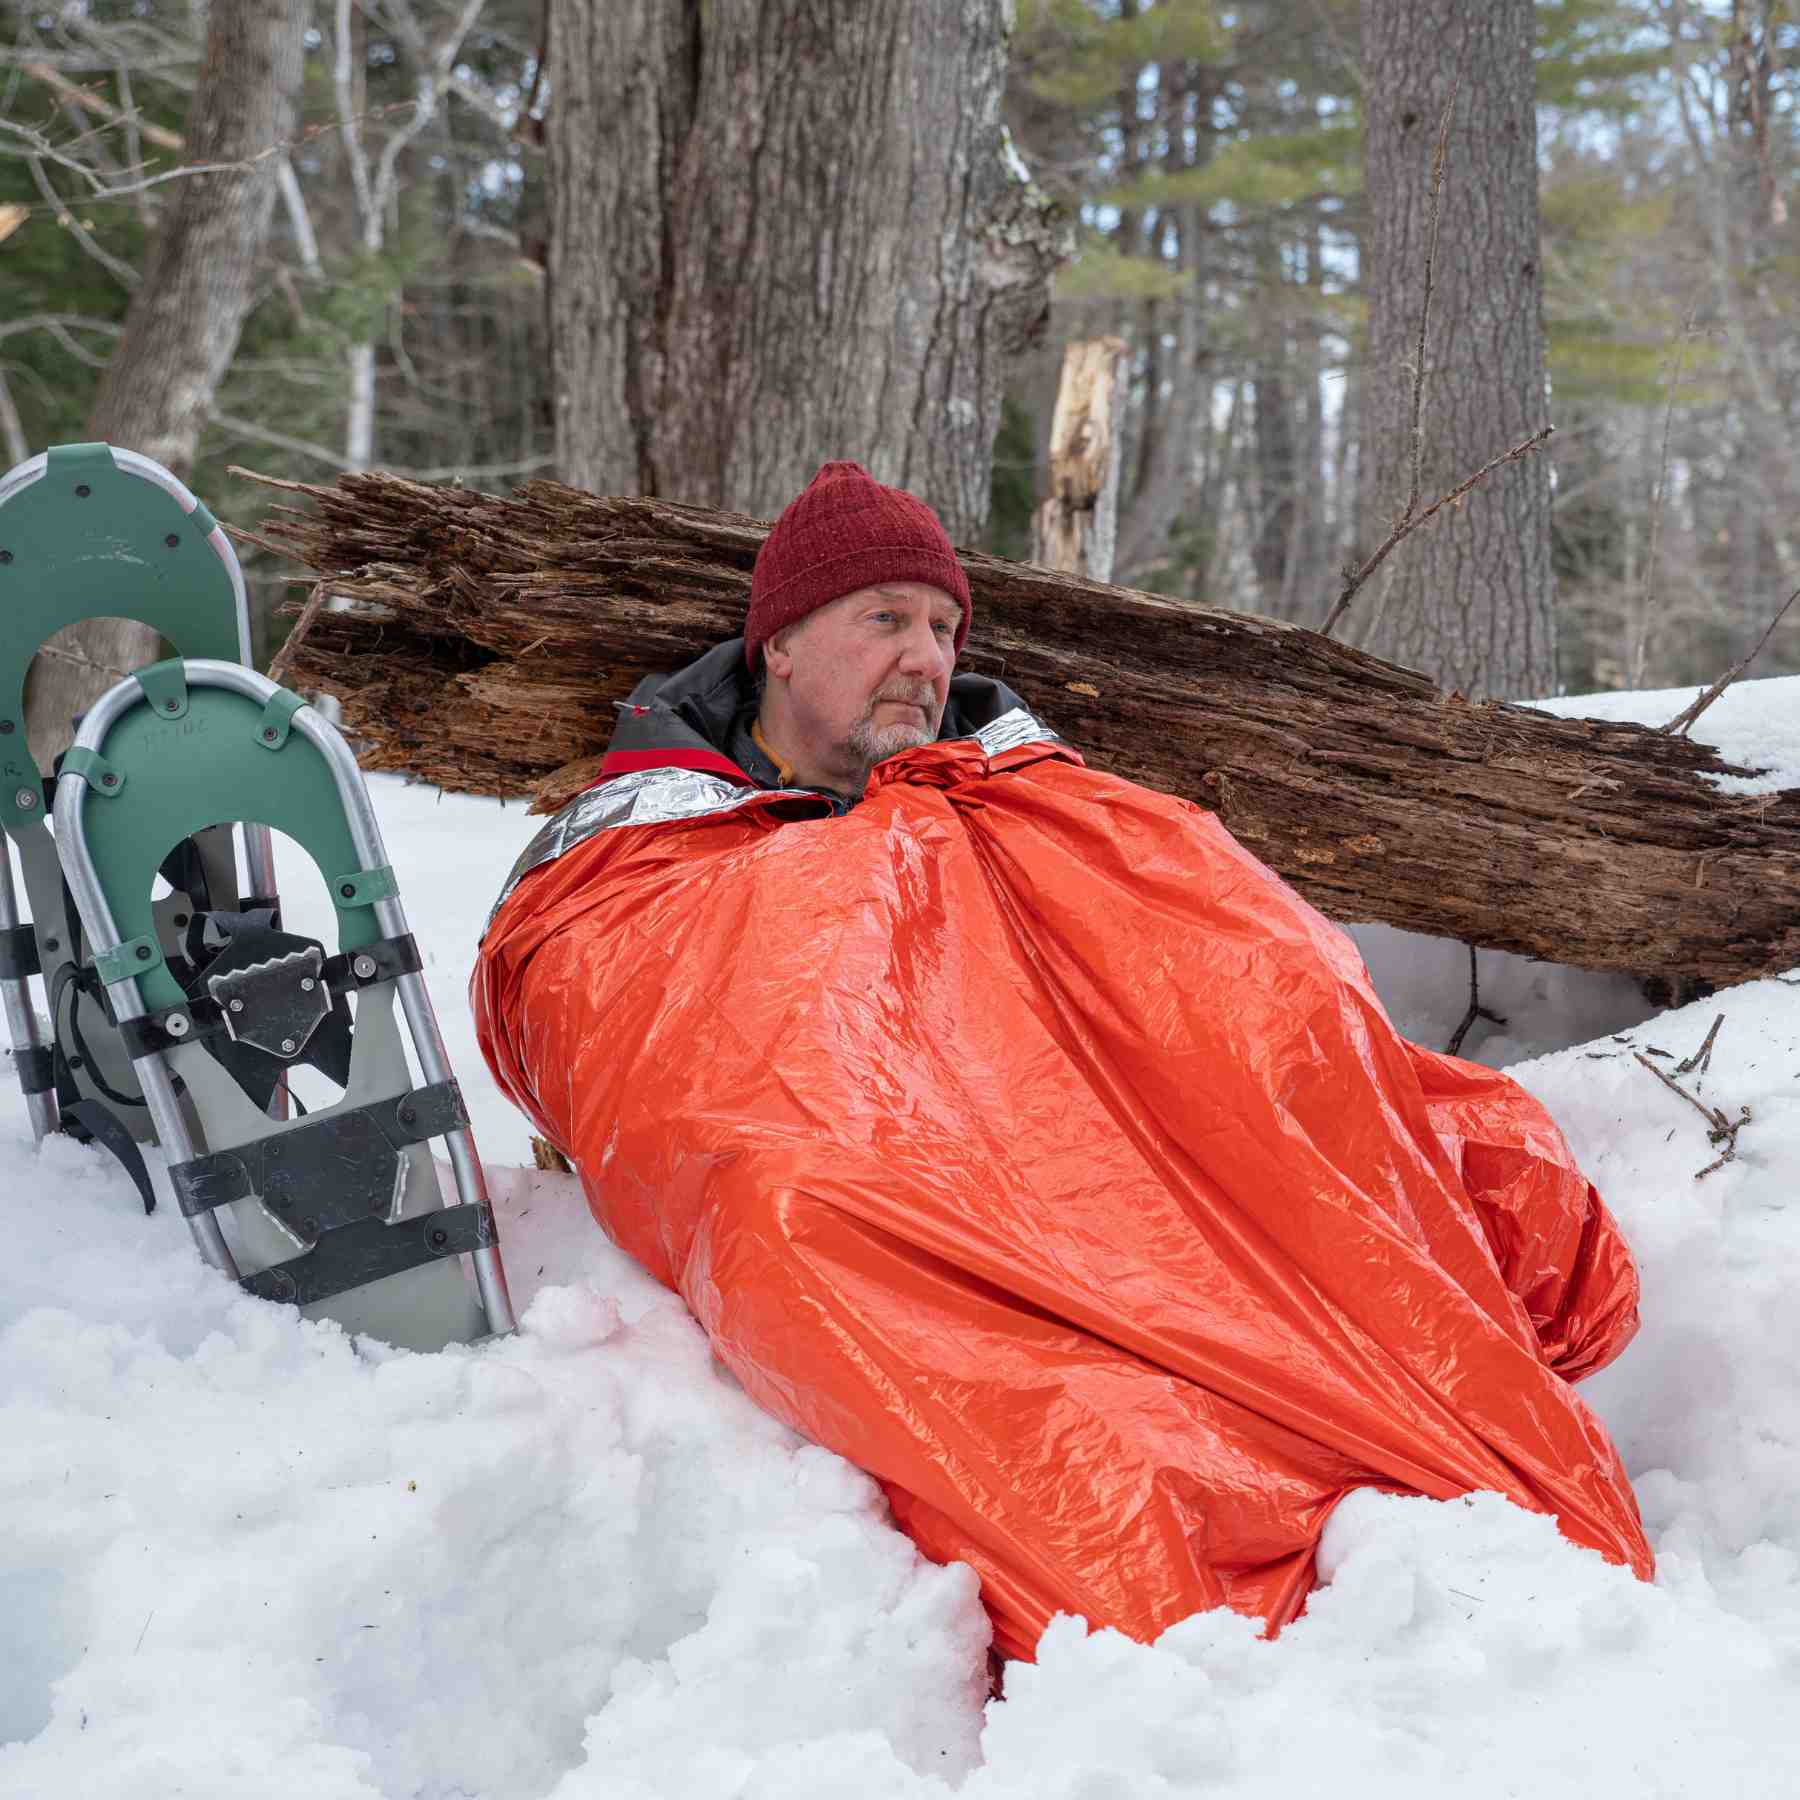 Emergency Bivvy XL w/ Rescue Whistle man wrapped in bivvy leaning on tree in snow with snowshoes next to him